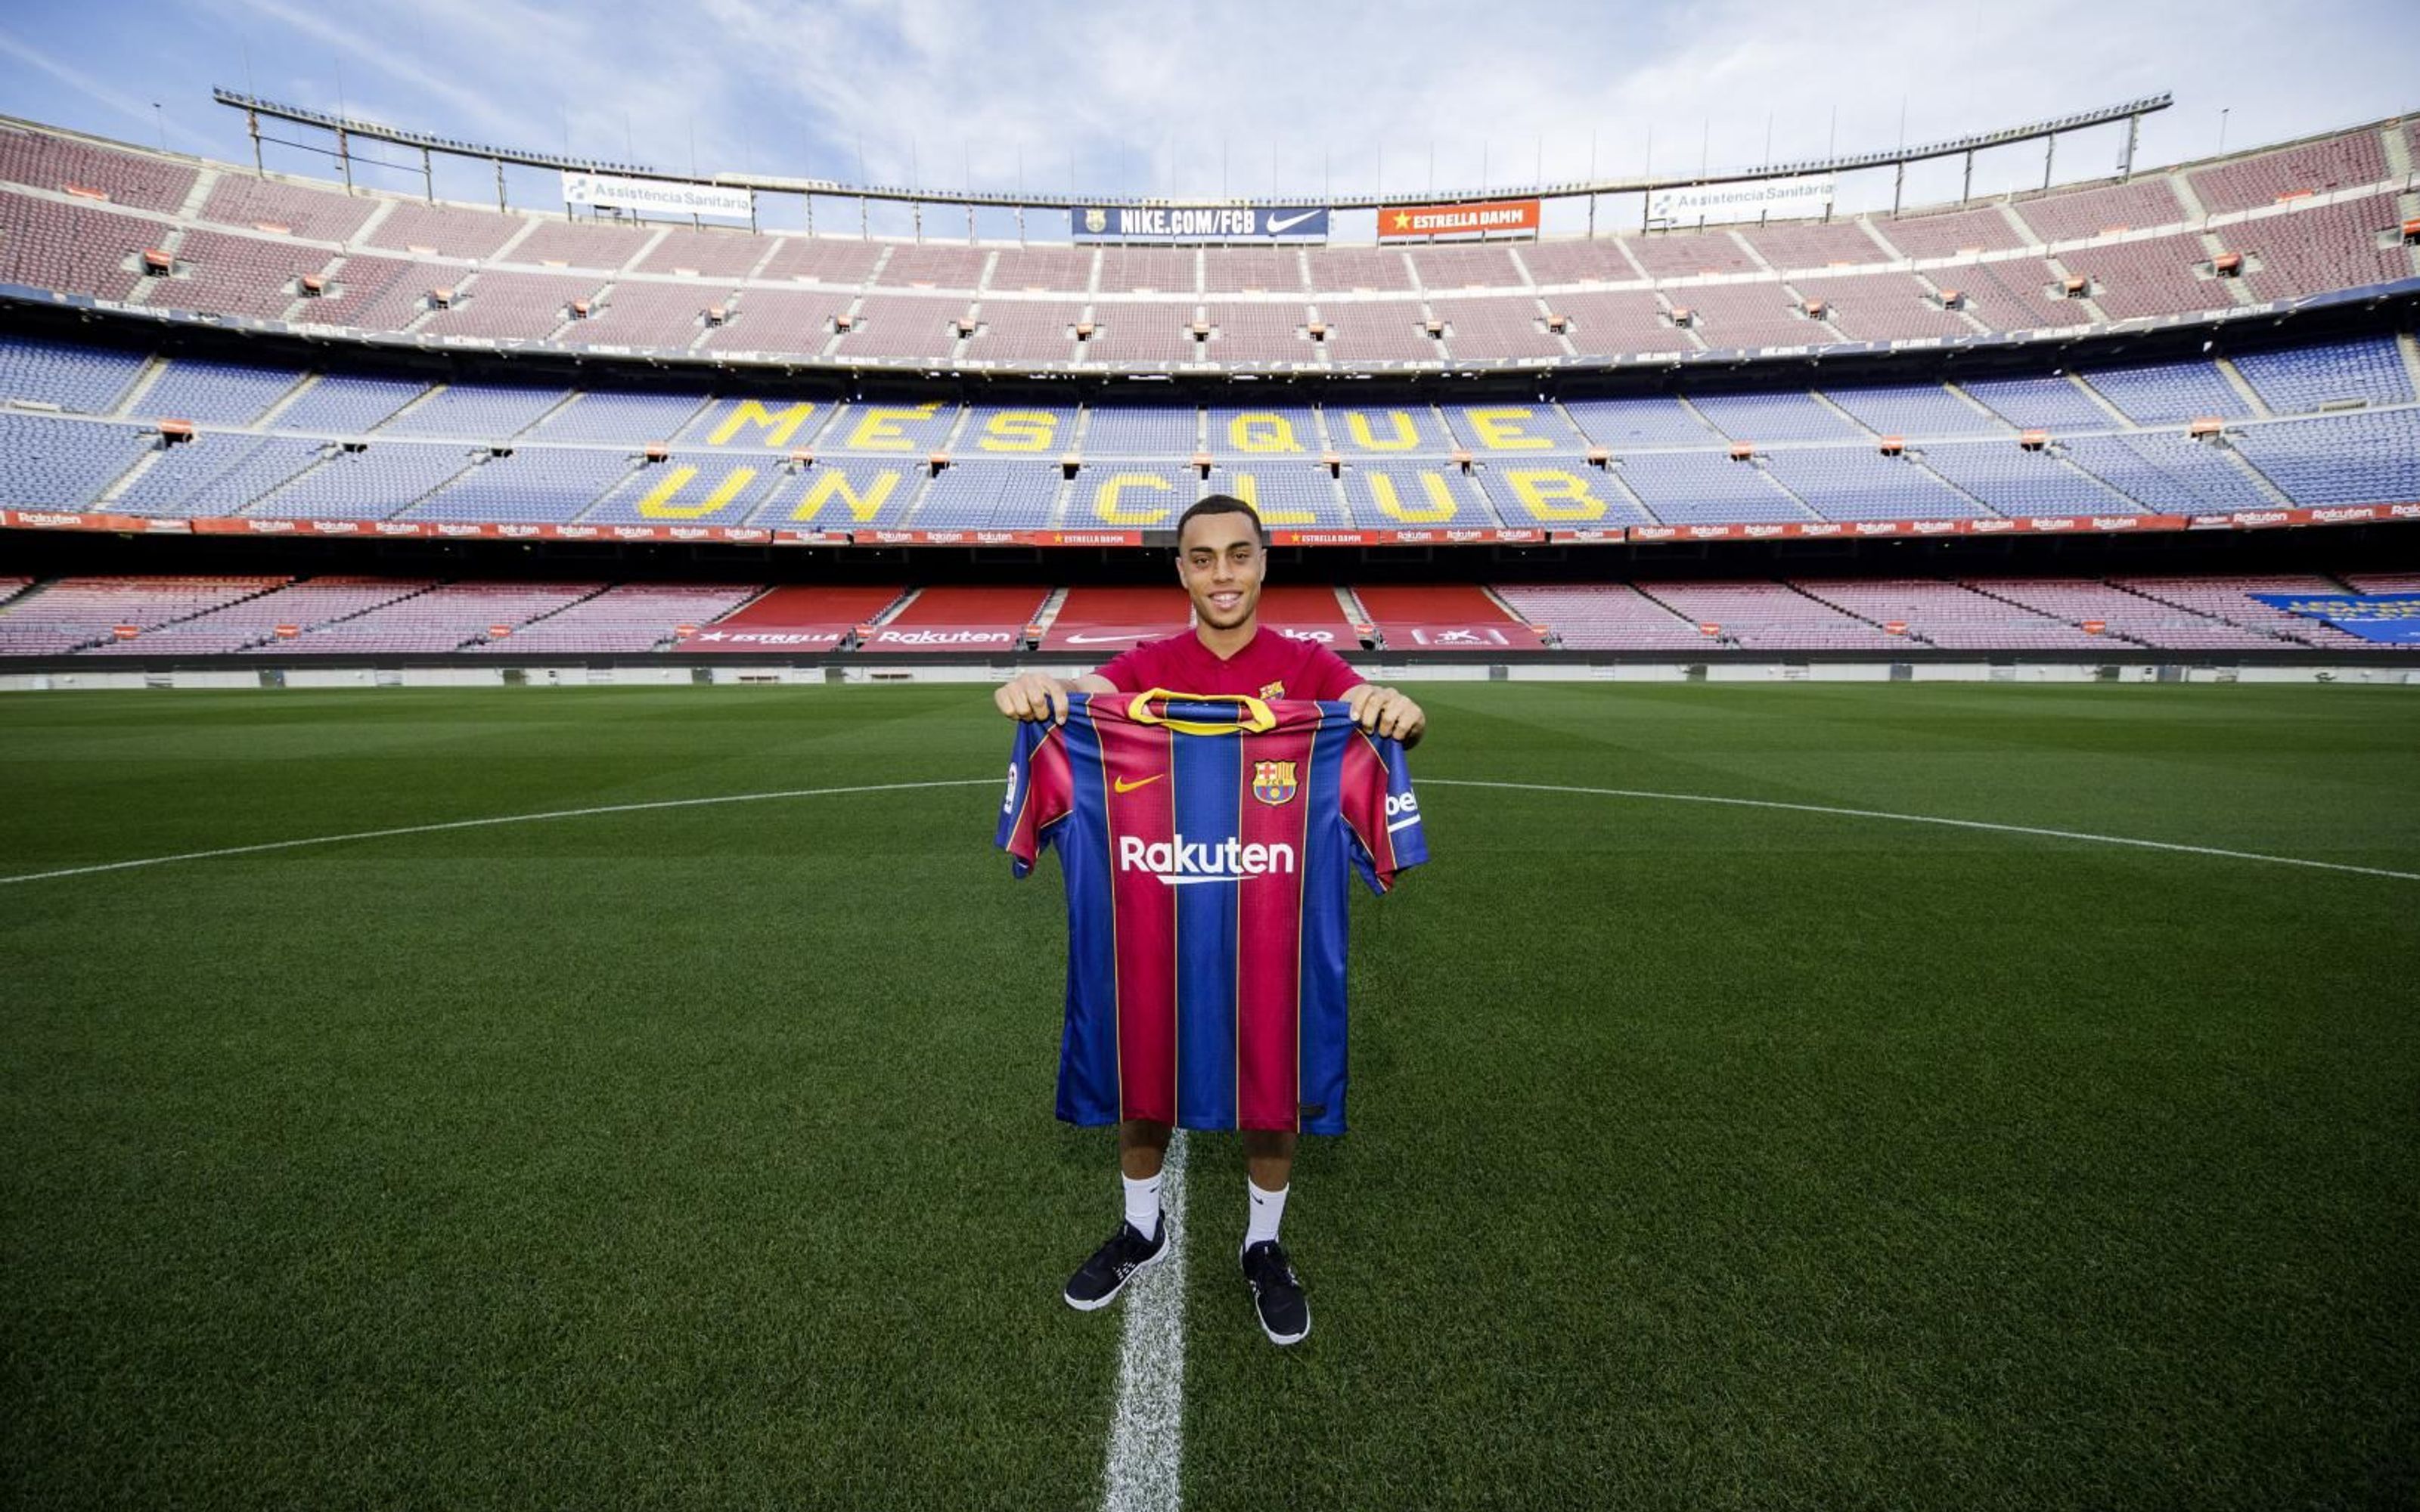 Barça signs its first US player: 19-year-old Sergiño Dest